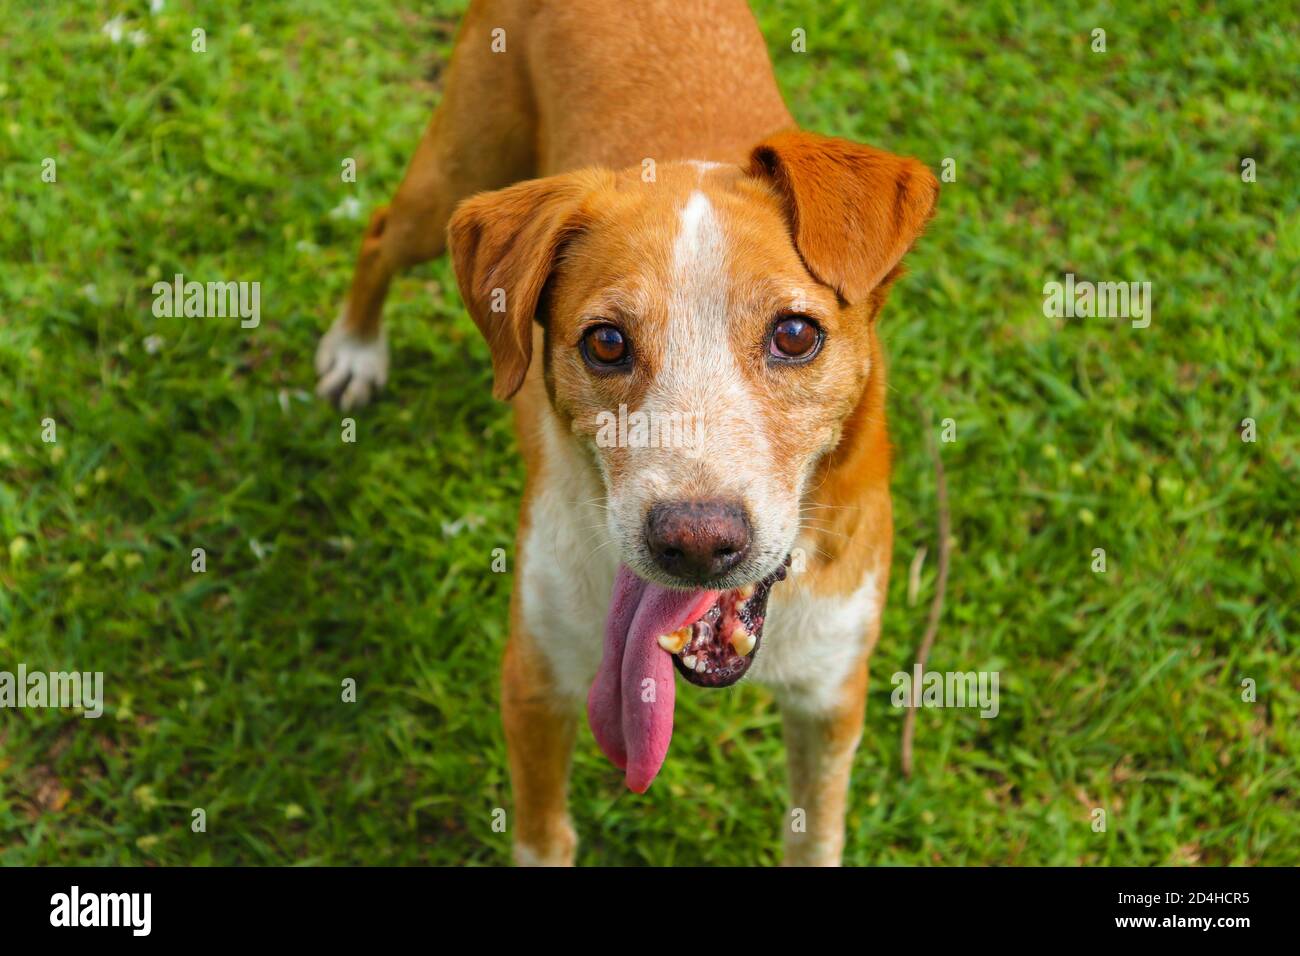 This dog is ready play catch with you! Stock Photo